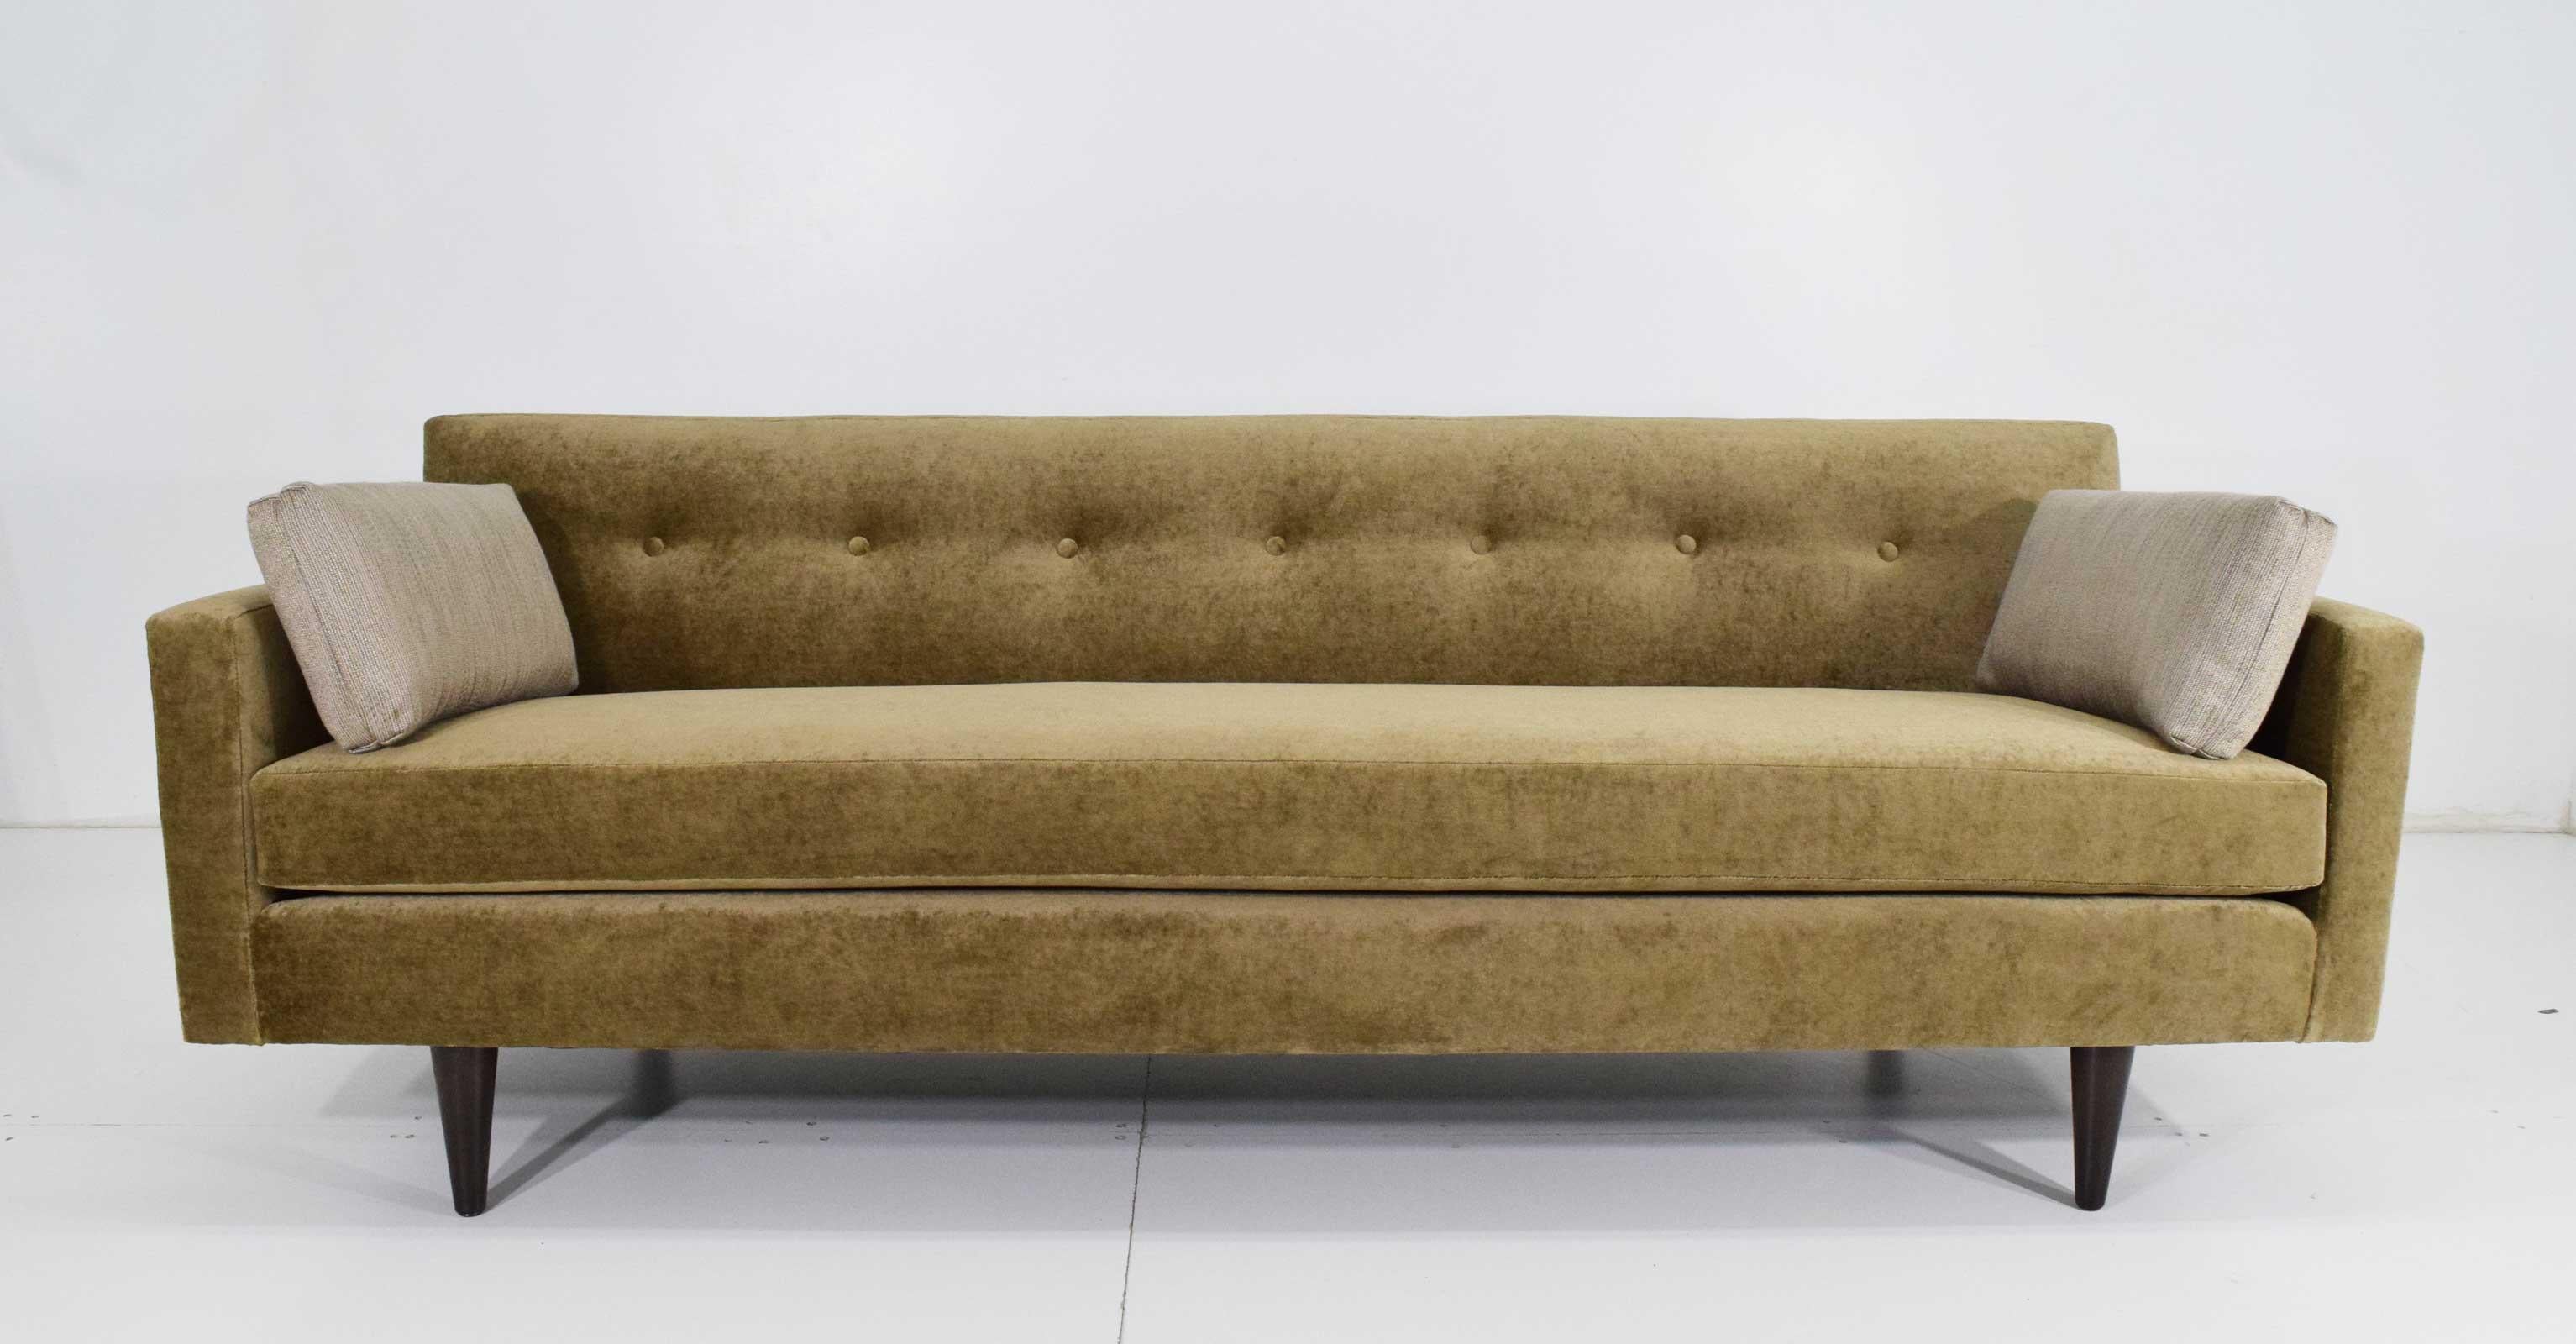 Dunbar sofa newly upholstered in Holly Hunt Cattail 100% linen with accent pillows in Holly Hunt Smokey Quartz.